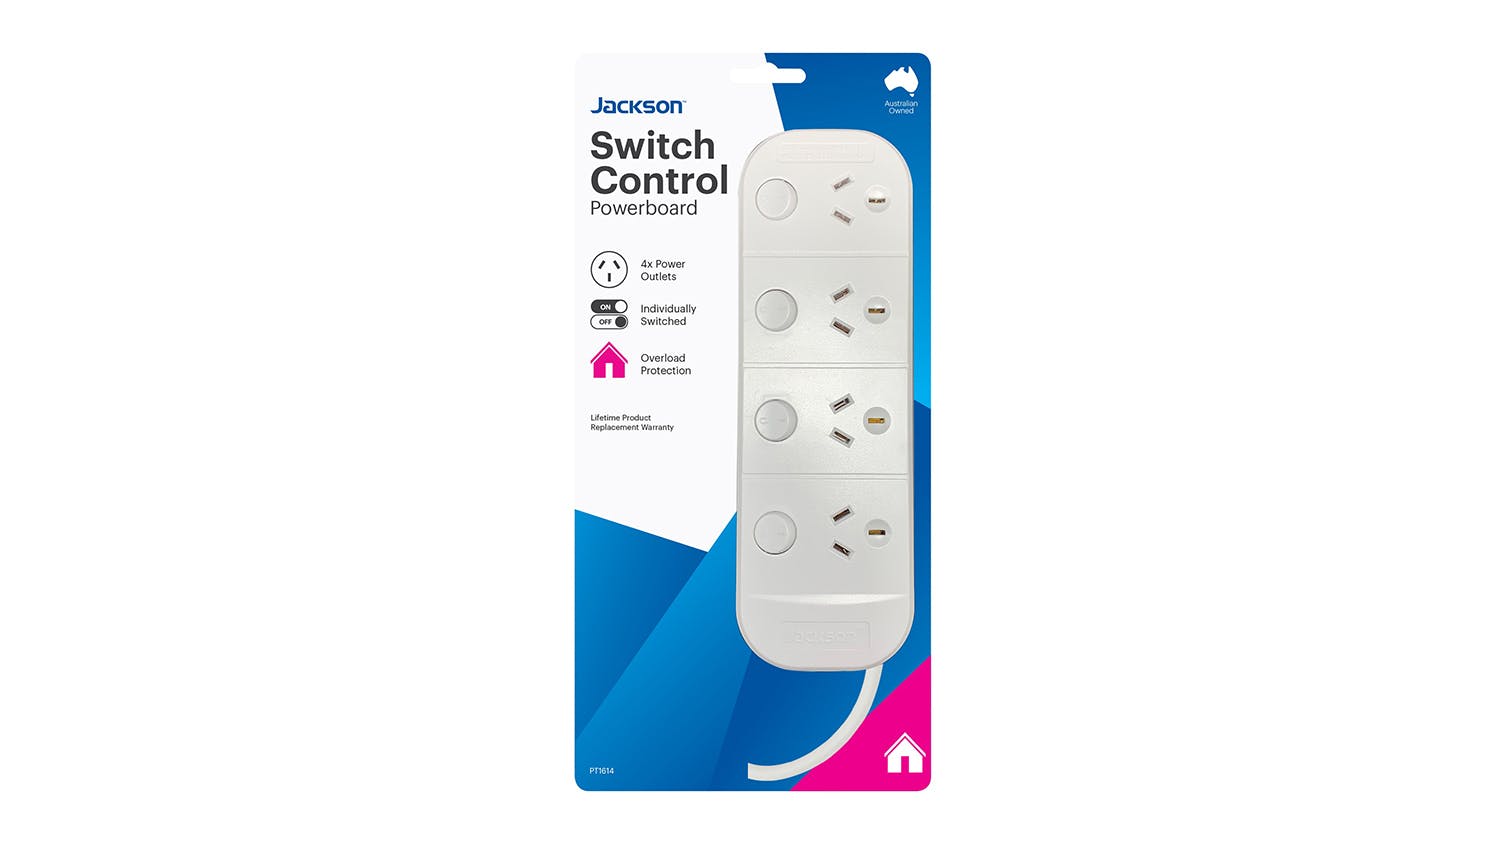 Jackson Switch Control Powerboard - White (4 Outlet)